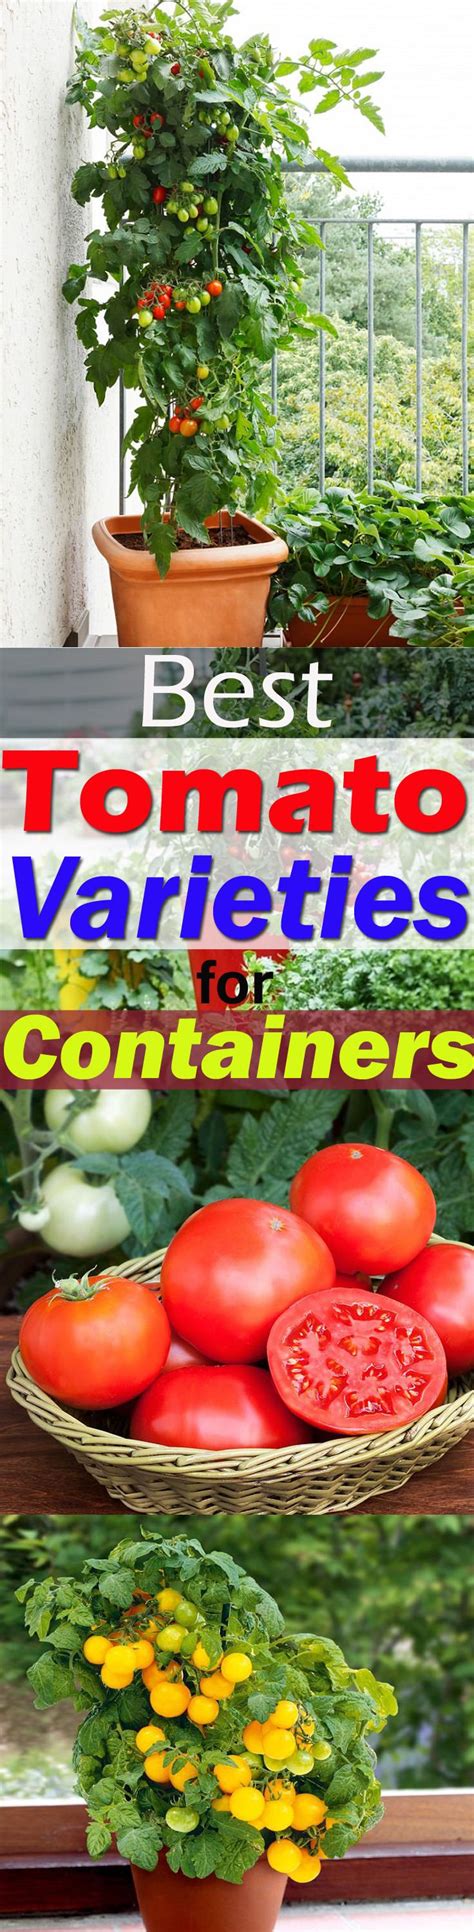 Best Tomato Varieties For Containers Tomato Garden Growing Tomatoes